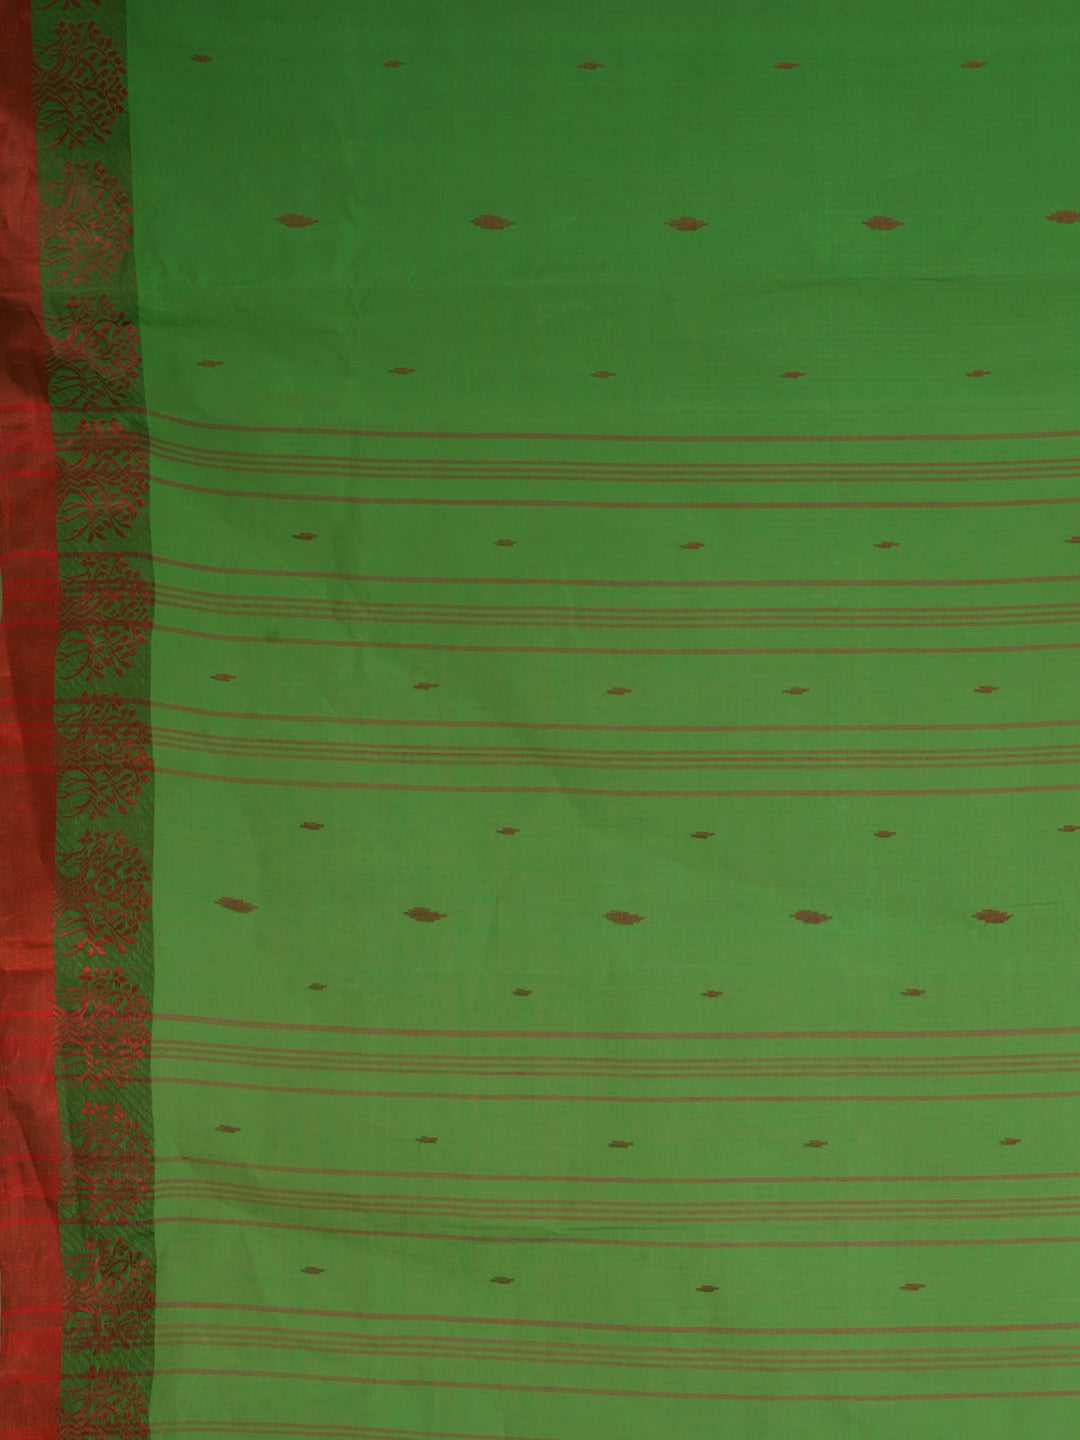 Women's Green Cotton Hand Woven Tant Saree With Red Border Without Blouse-Sajasajo